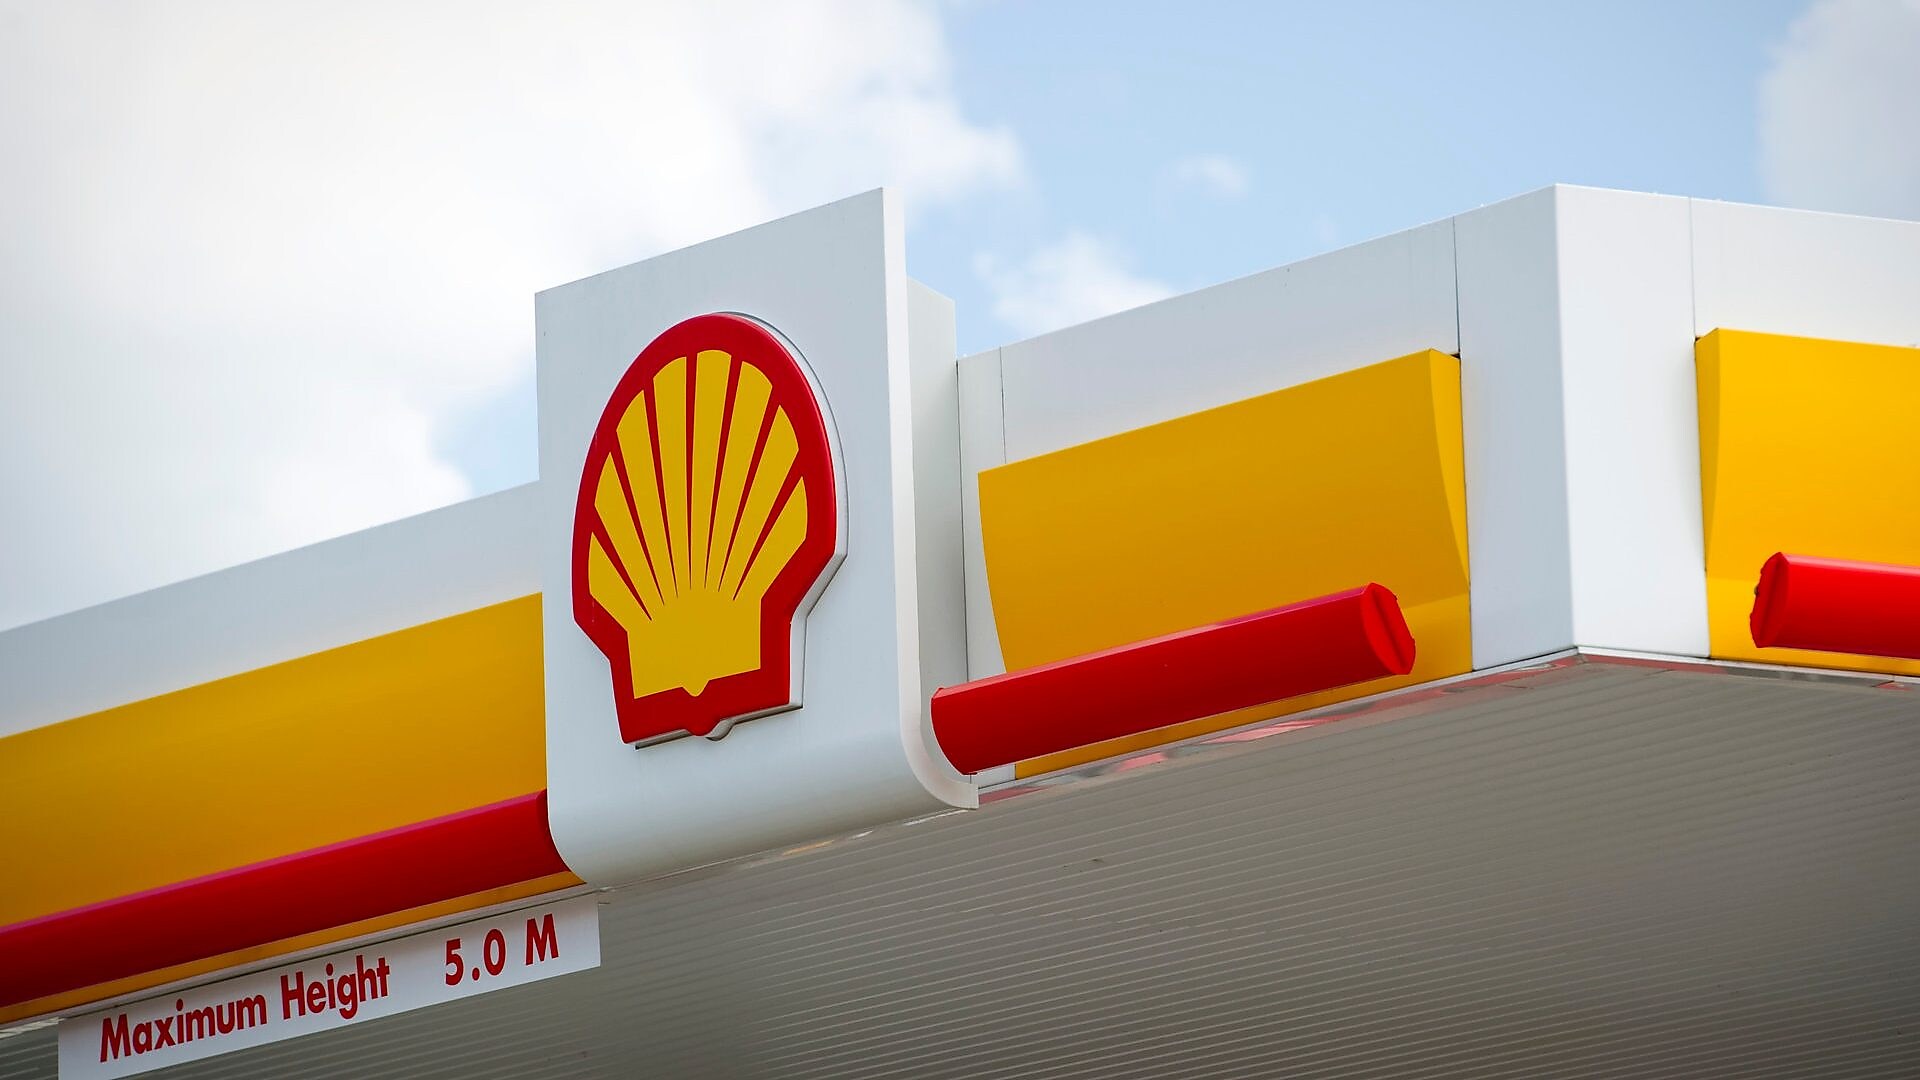 Shell is hiring | Graduate Programme| Apply here!